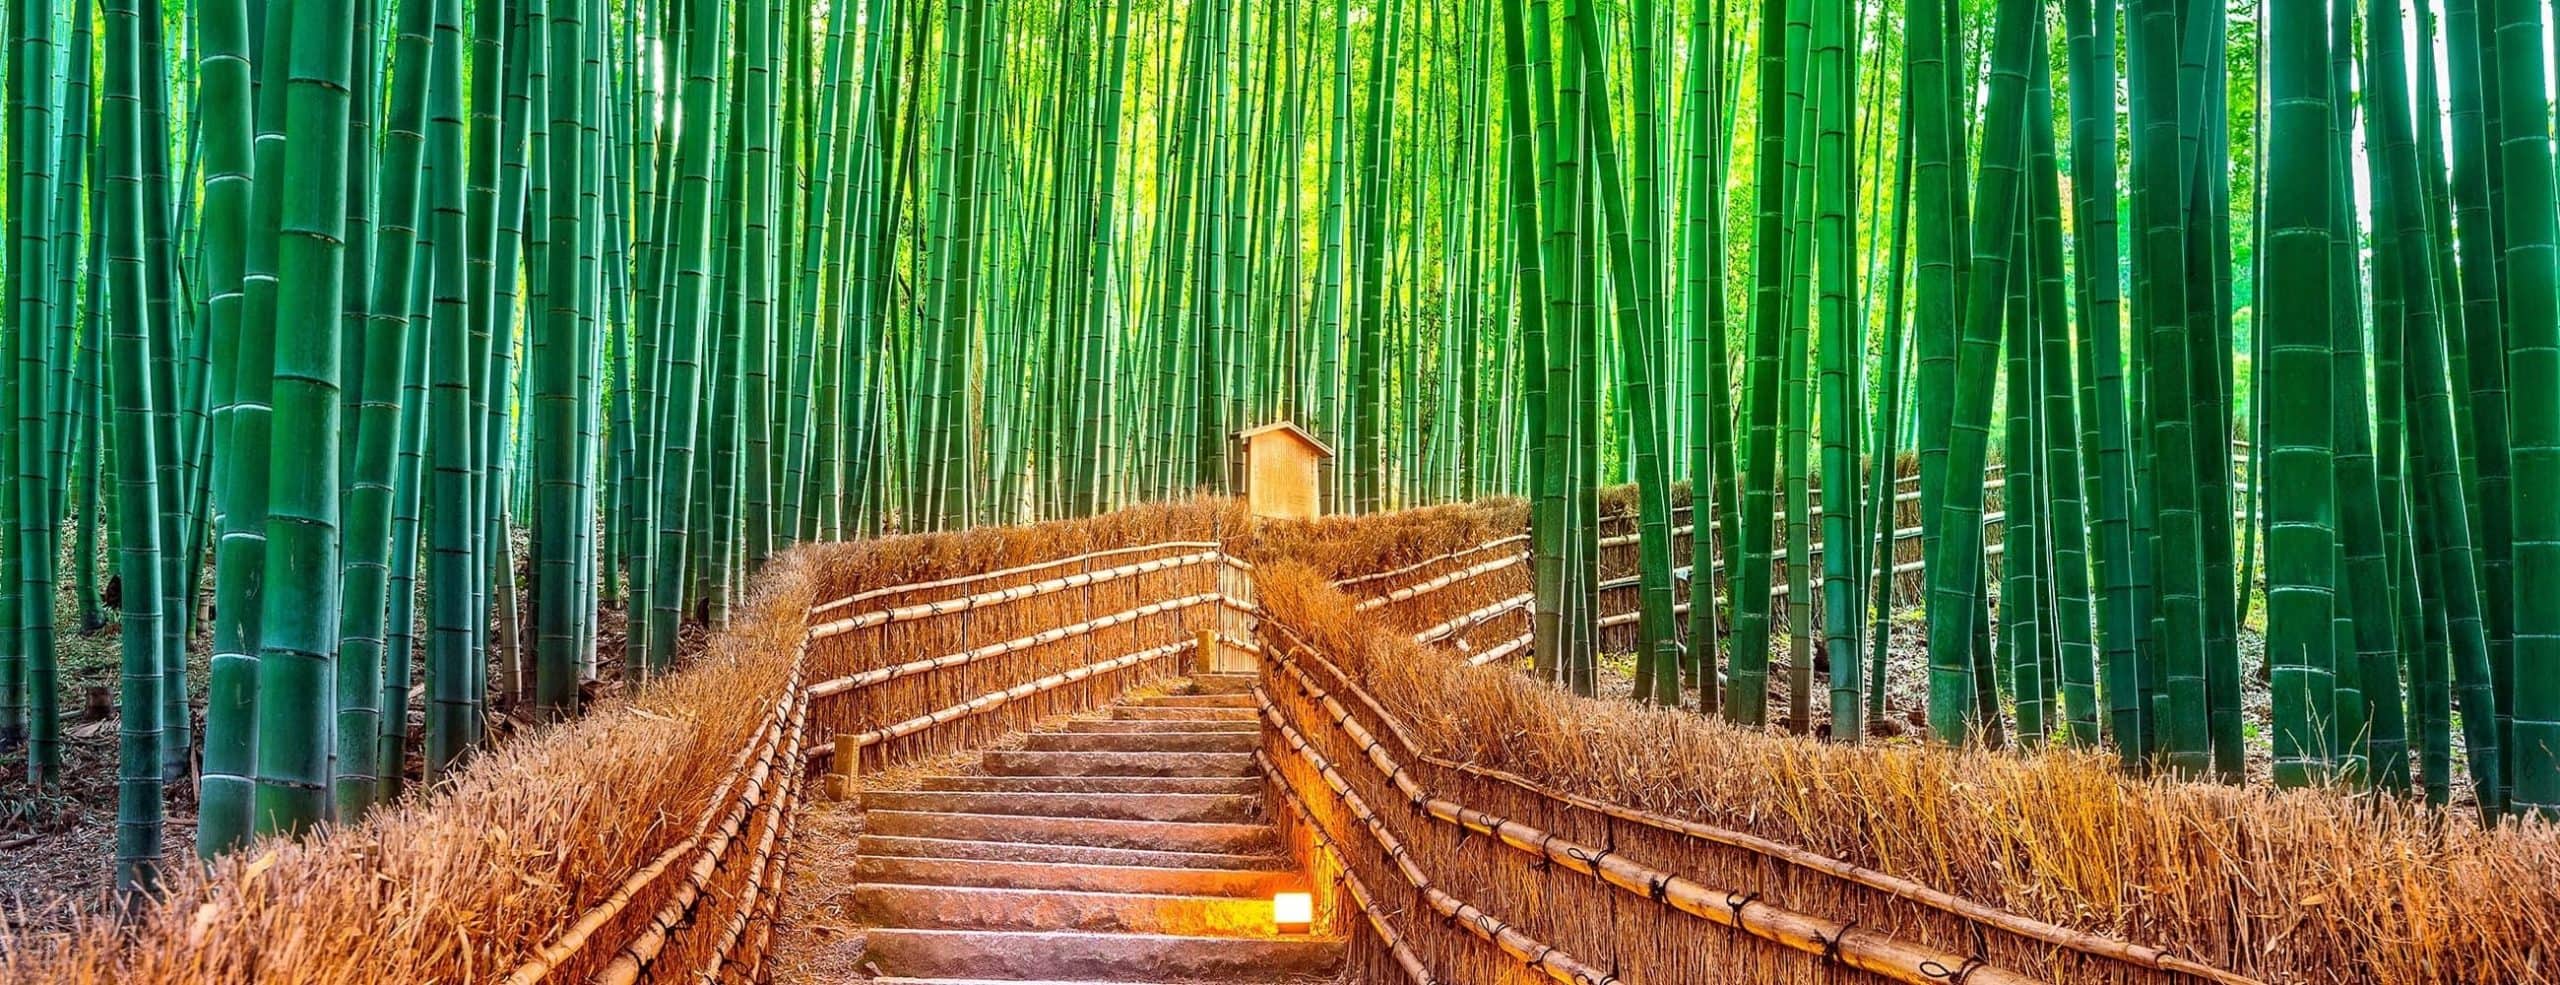 bamboo forest with brown footpath